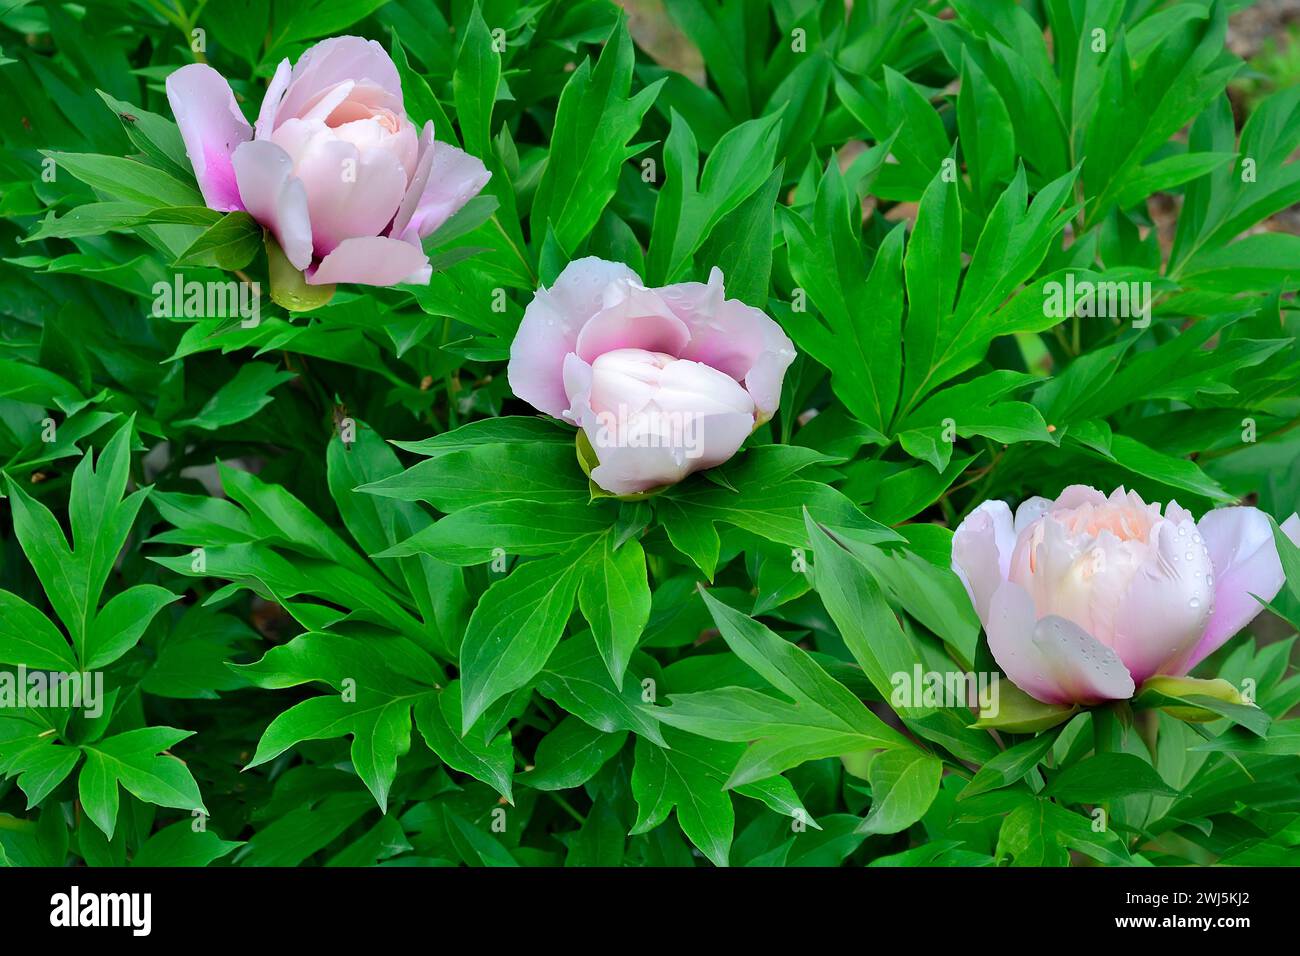 Three buds of delicate white-pink semi-double peony flowers with dark lavender spots at base of petals, close up in summer garden. Itoh hybrid, variet Stock Photo